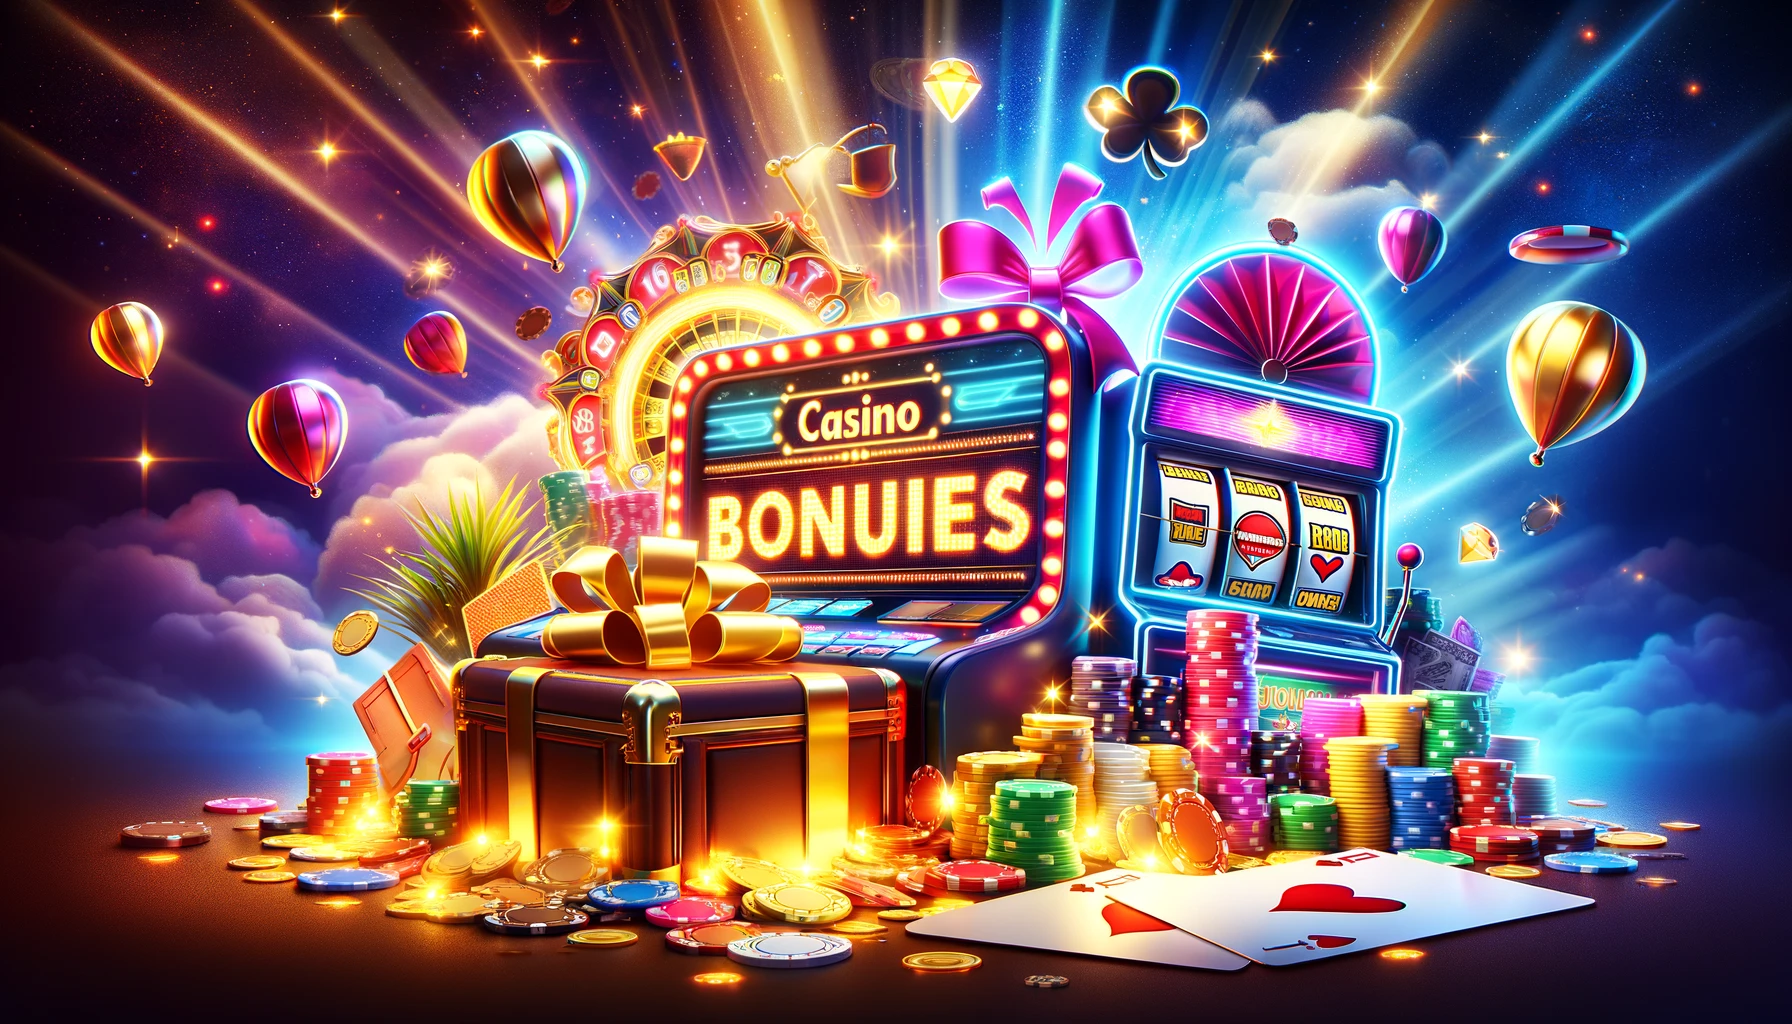 1 _A vibrant and enticing horizontal image showcasing the concept of online casino bonuses. The scene is filled with typical casino elements like slot ma